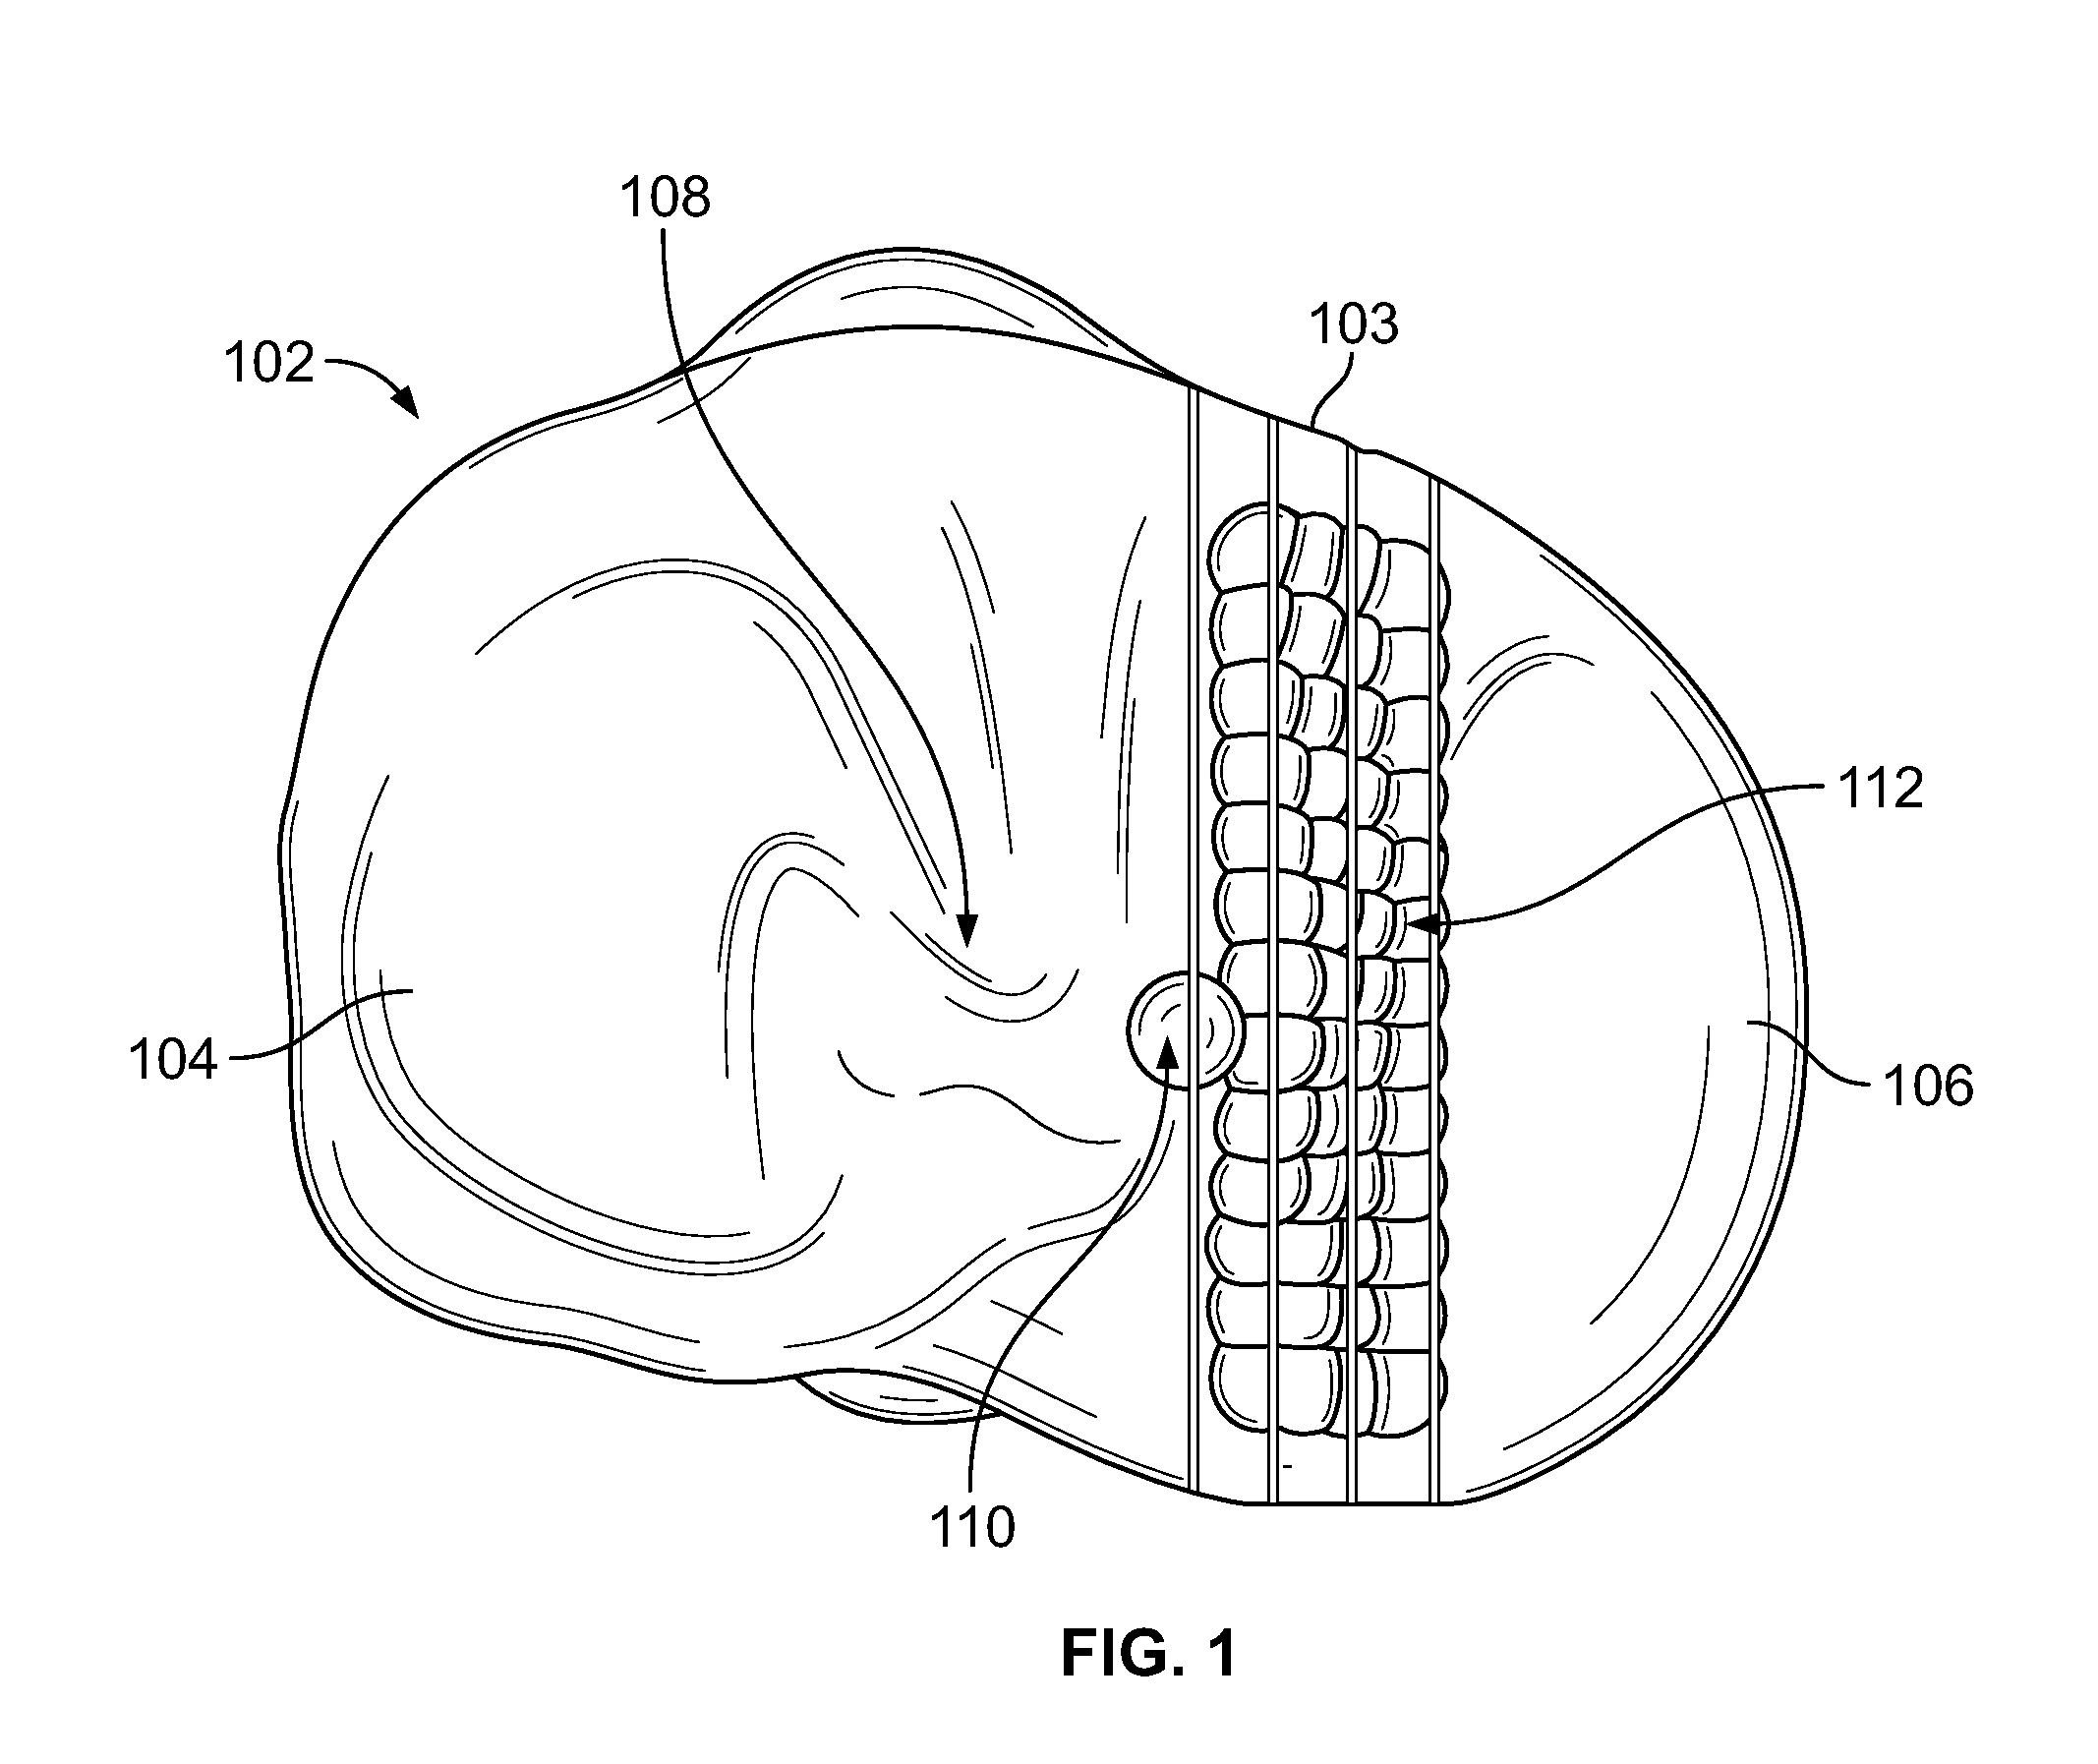 Morphologically curved sagittal wall of a tibial implant